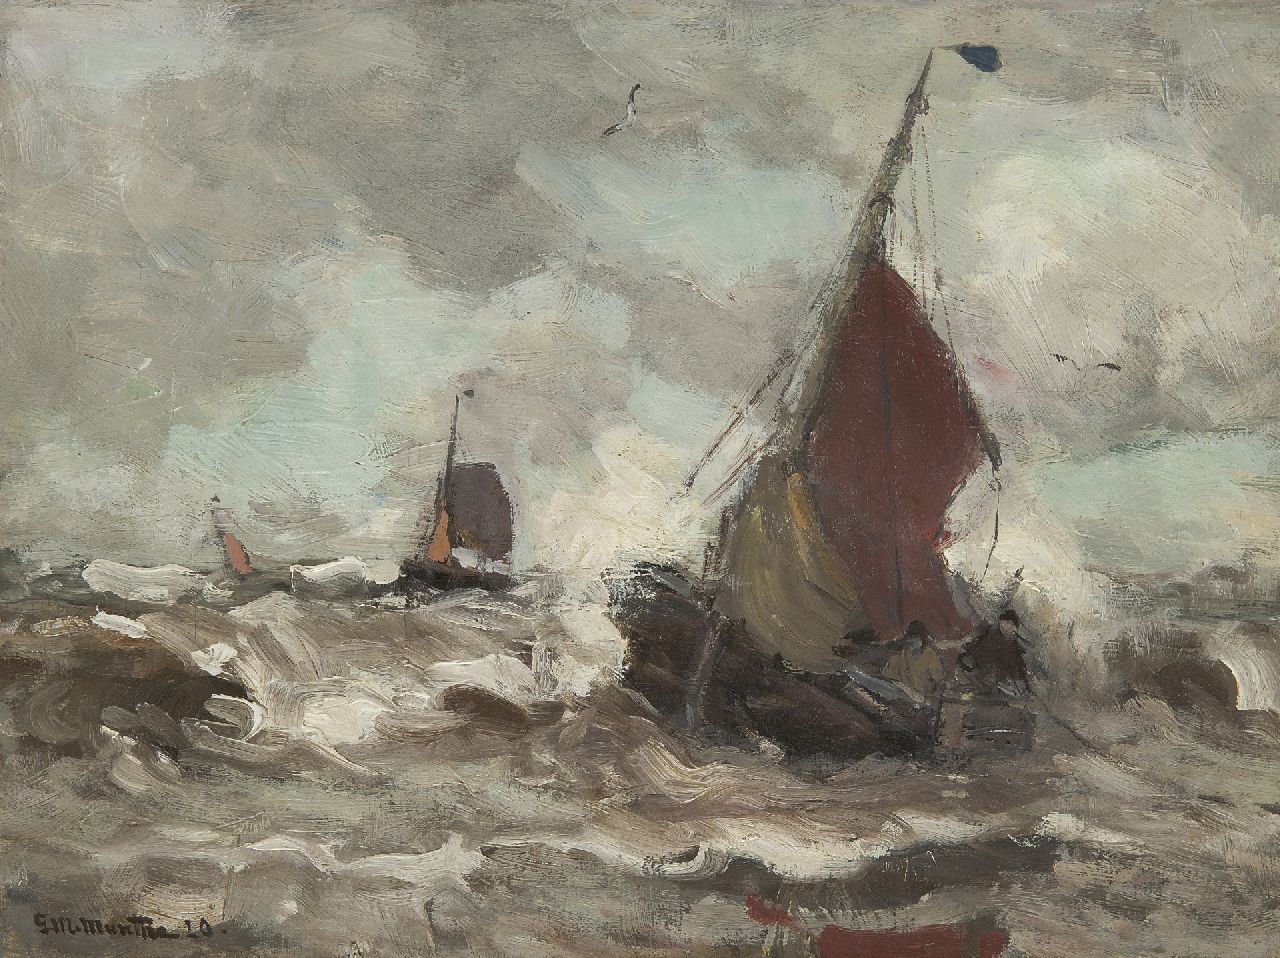 Munthe G.A.L.  | Gerhard Arij Ludwig 'Morgenstjerne' Munthe, Barges in the surf, in a storm, oil on canvas 30.6 x 40.6 cm, signed l.l. and dated '20